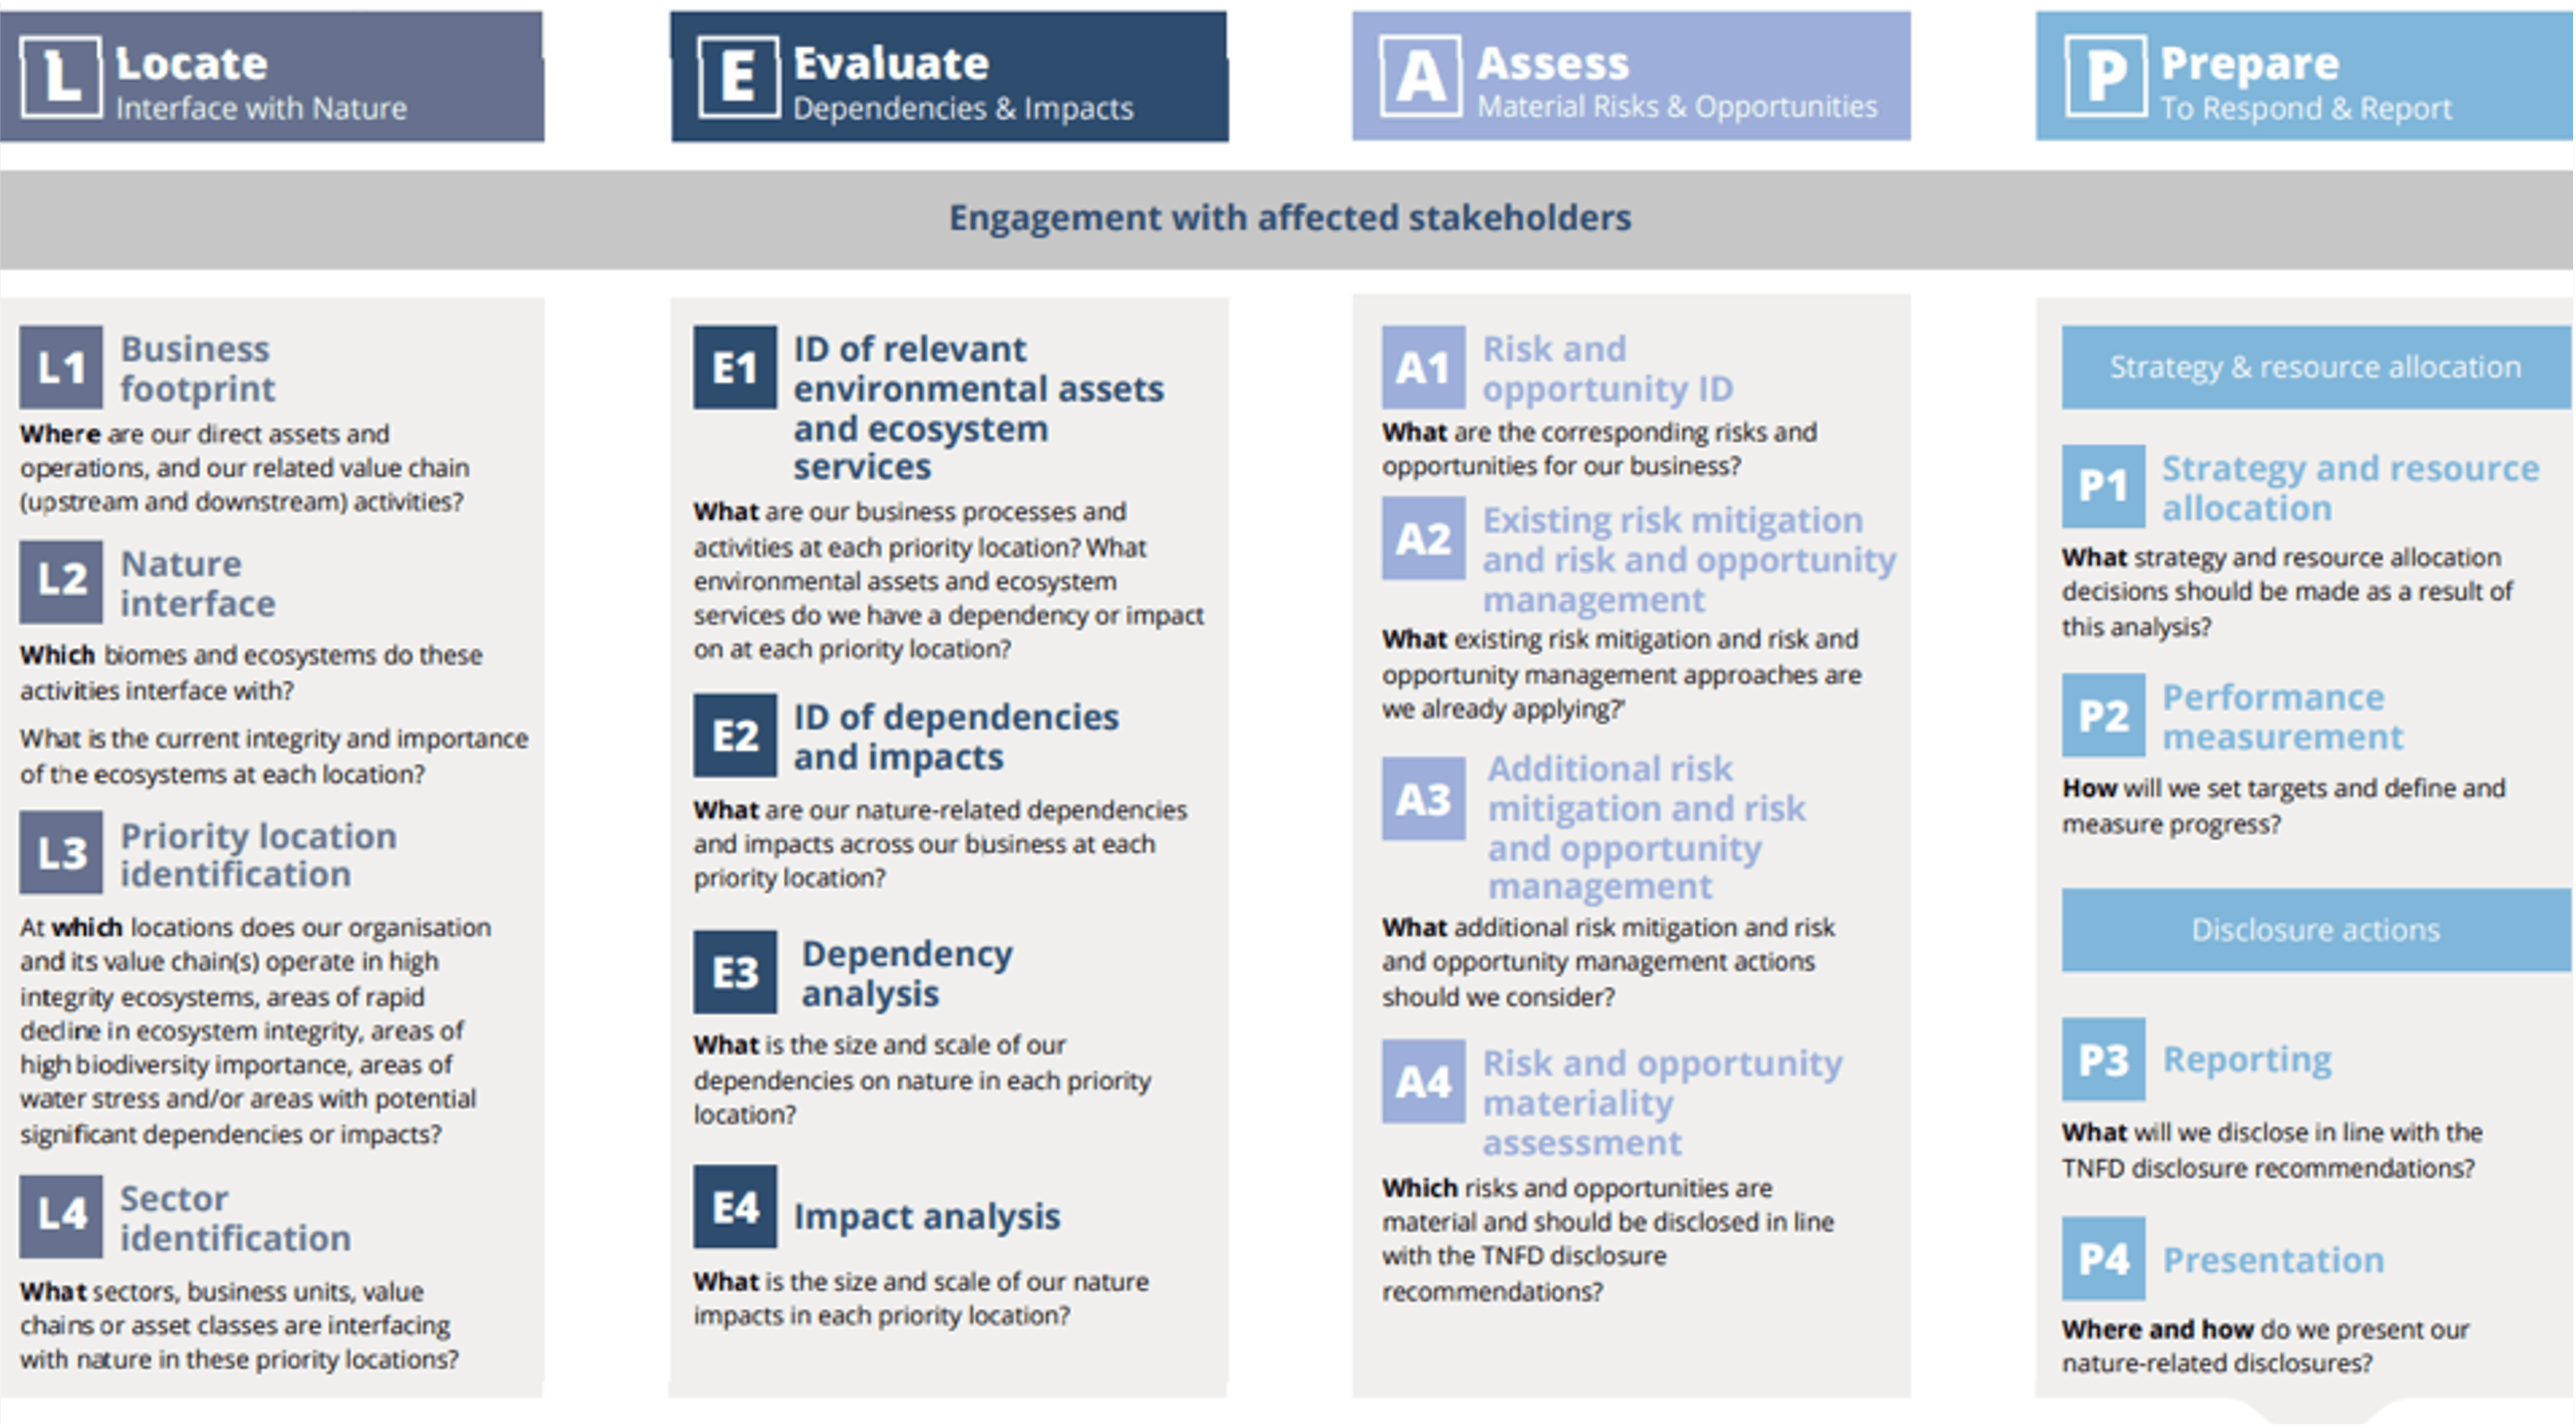 A table outlining the LEAP (Locate, Evaluate, Assess, Prepare) framework and the engagement with affected stakeholders